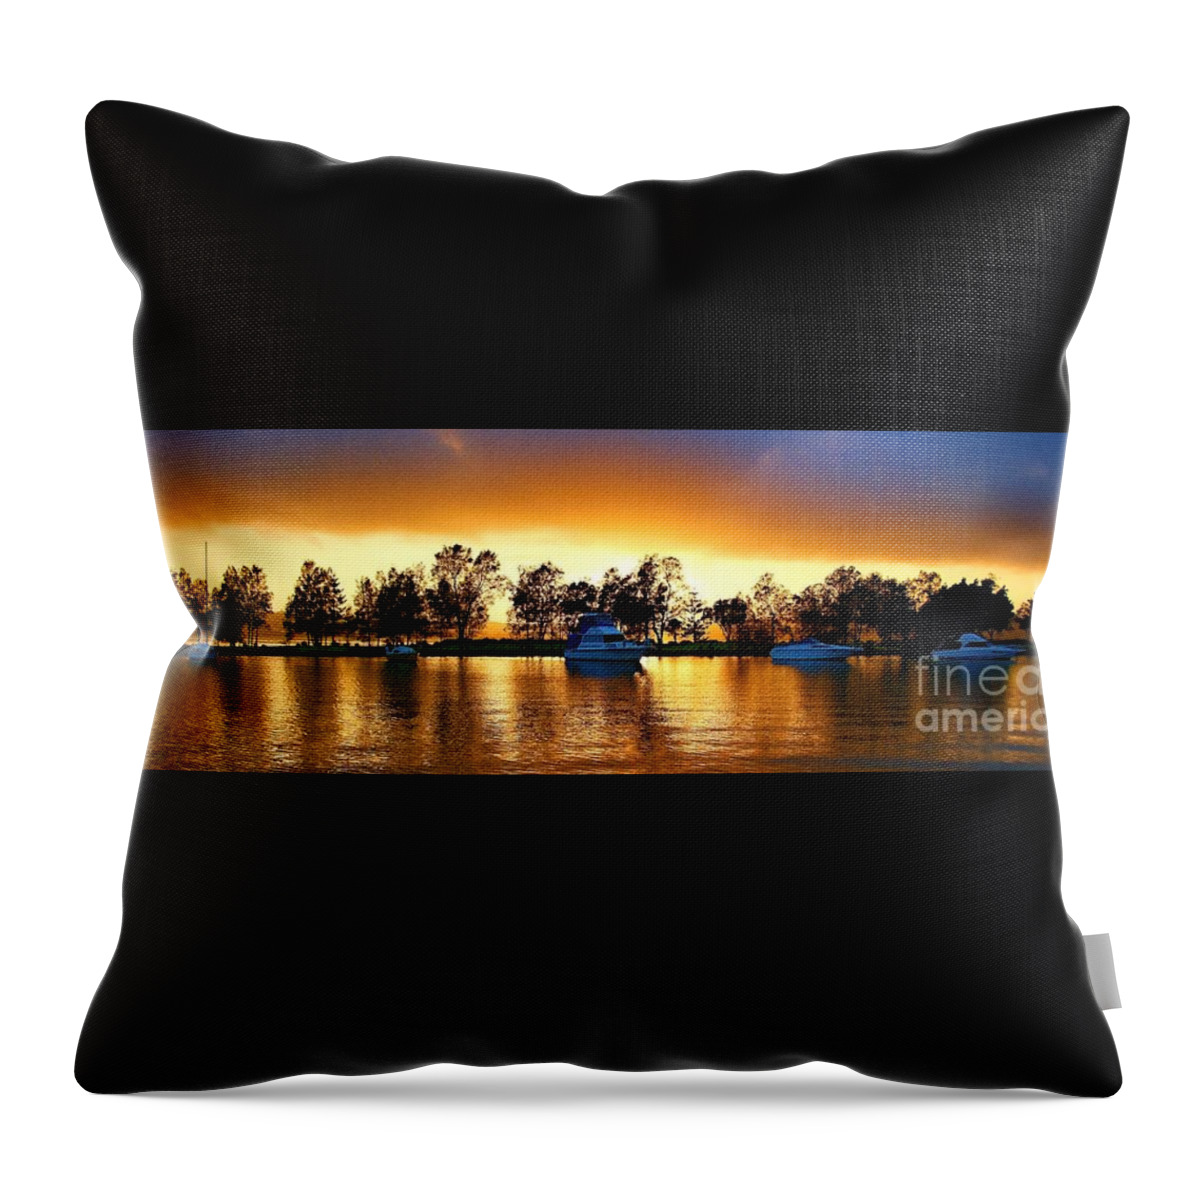 Sunrise Throw Pillow featuring the photograph Marmong Point Sunrise. Original exclusive photo art. by Geoff Childs